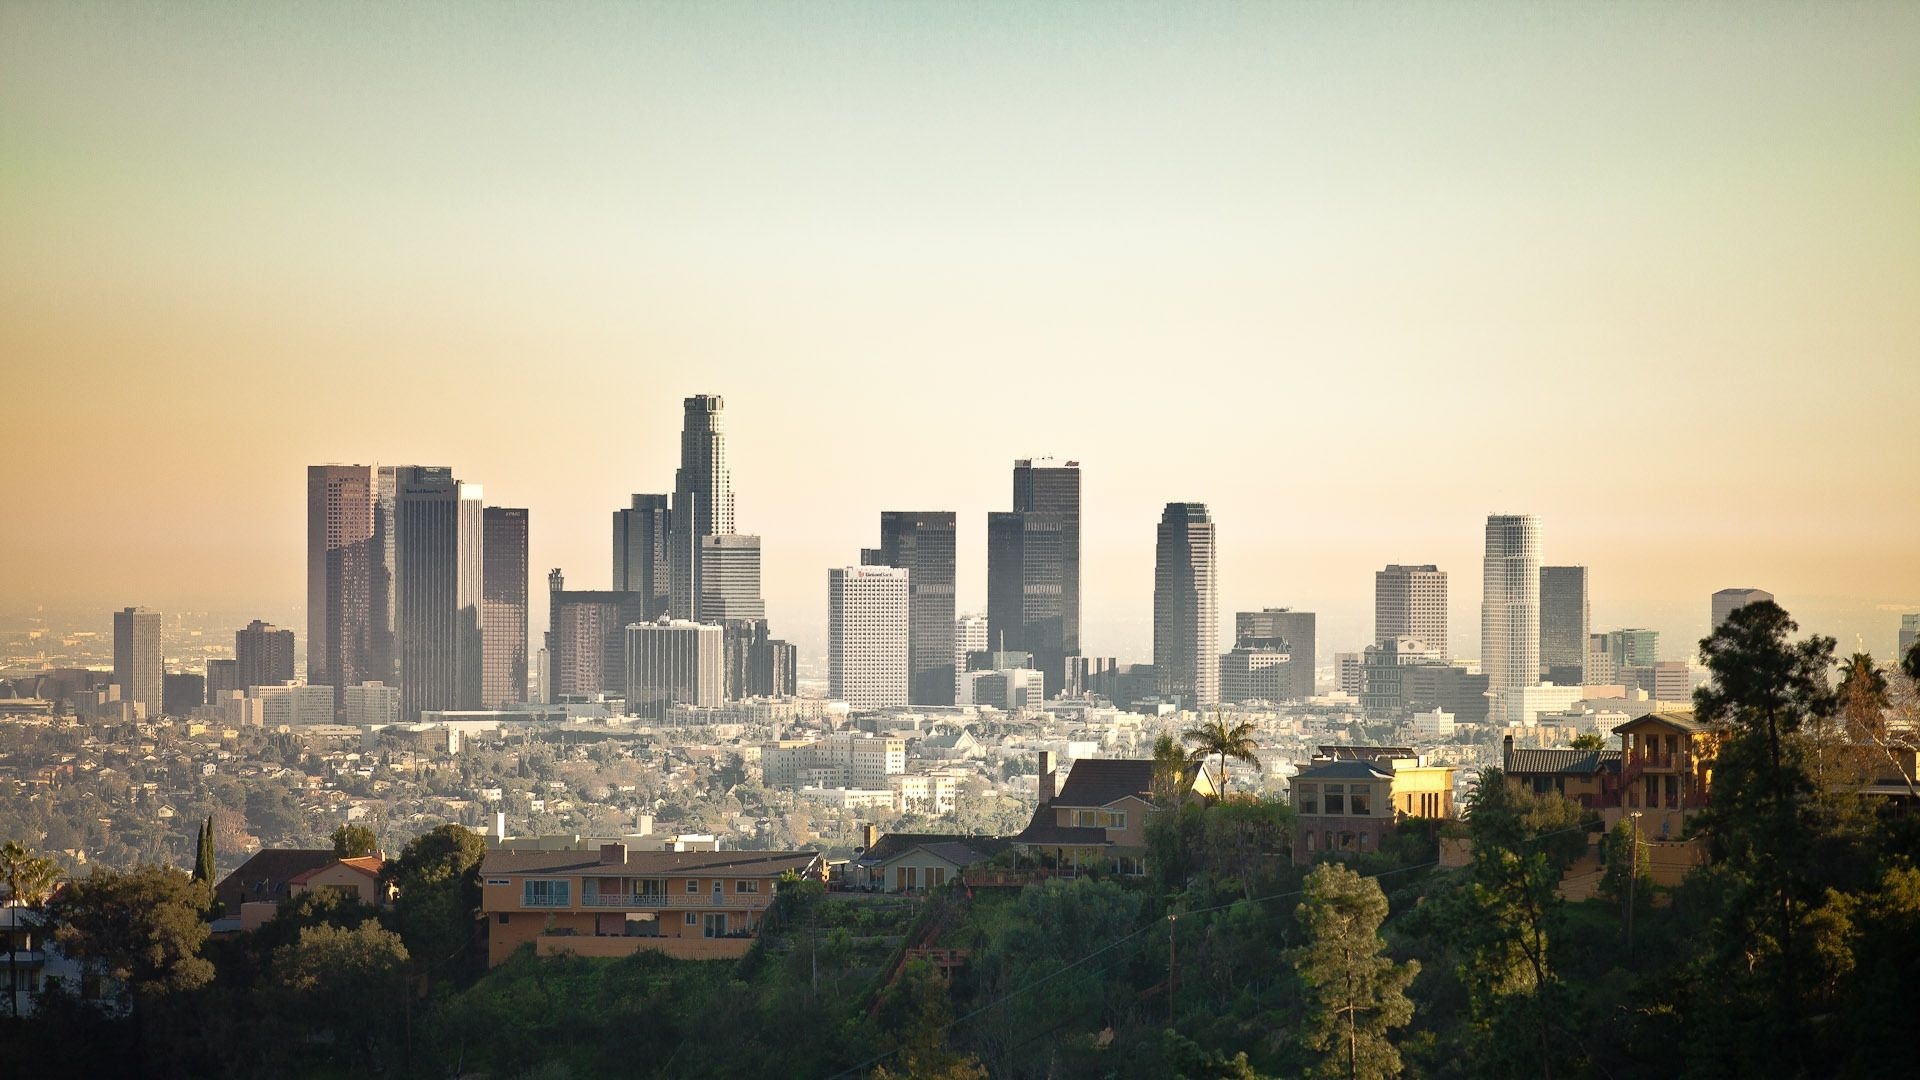 Los Angeles: The City of Angels, Skyscrapers, Cityscape. 1920x1080 Full HD Background.